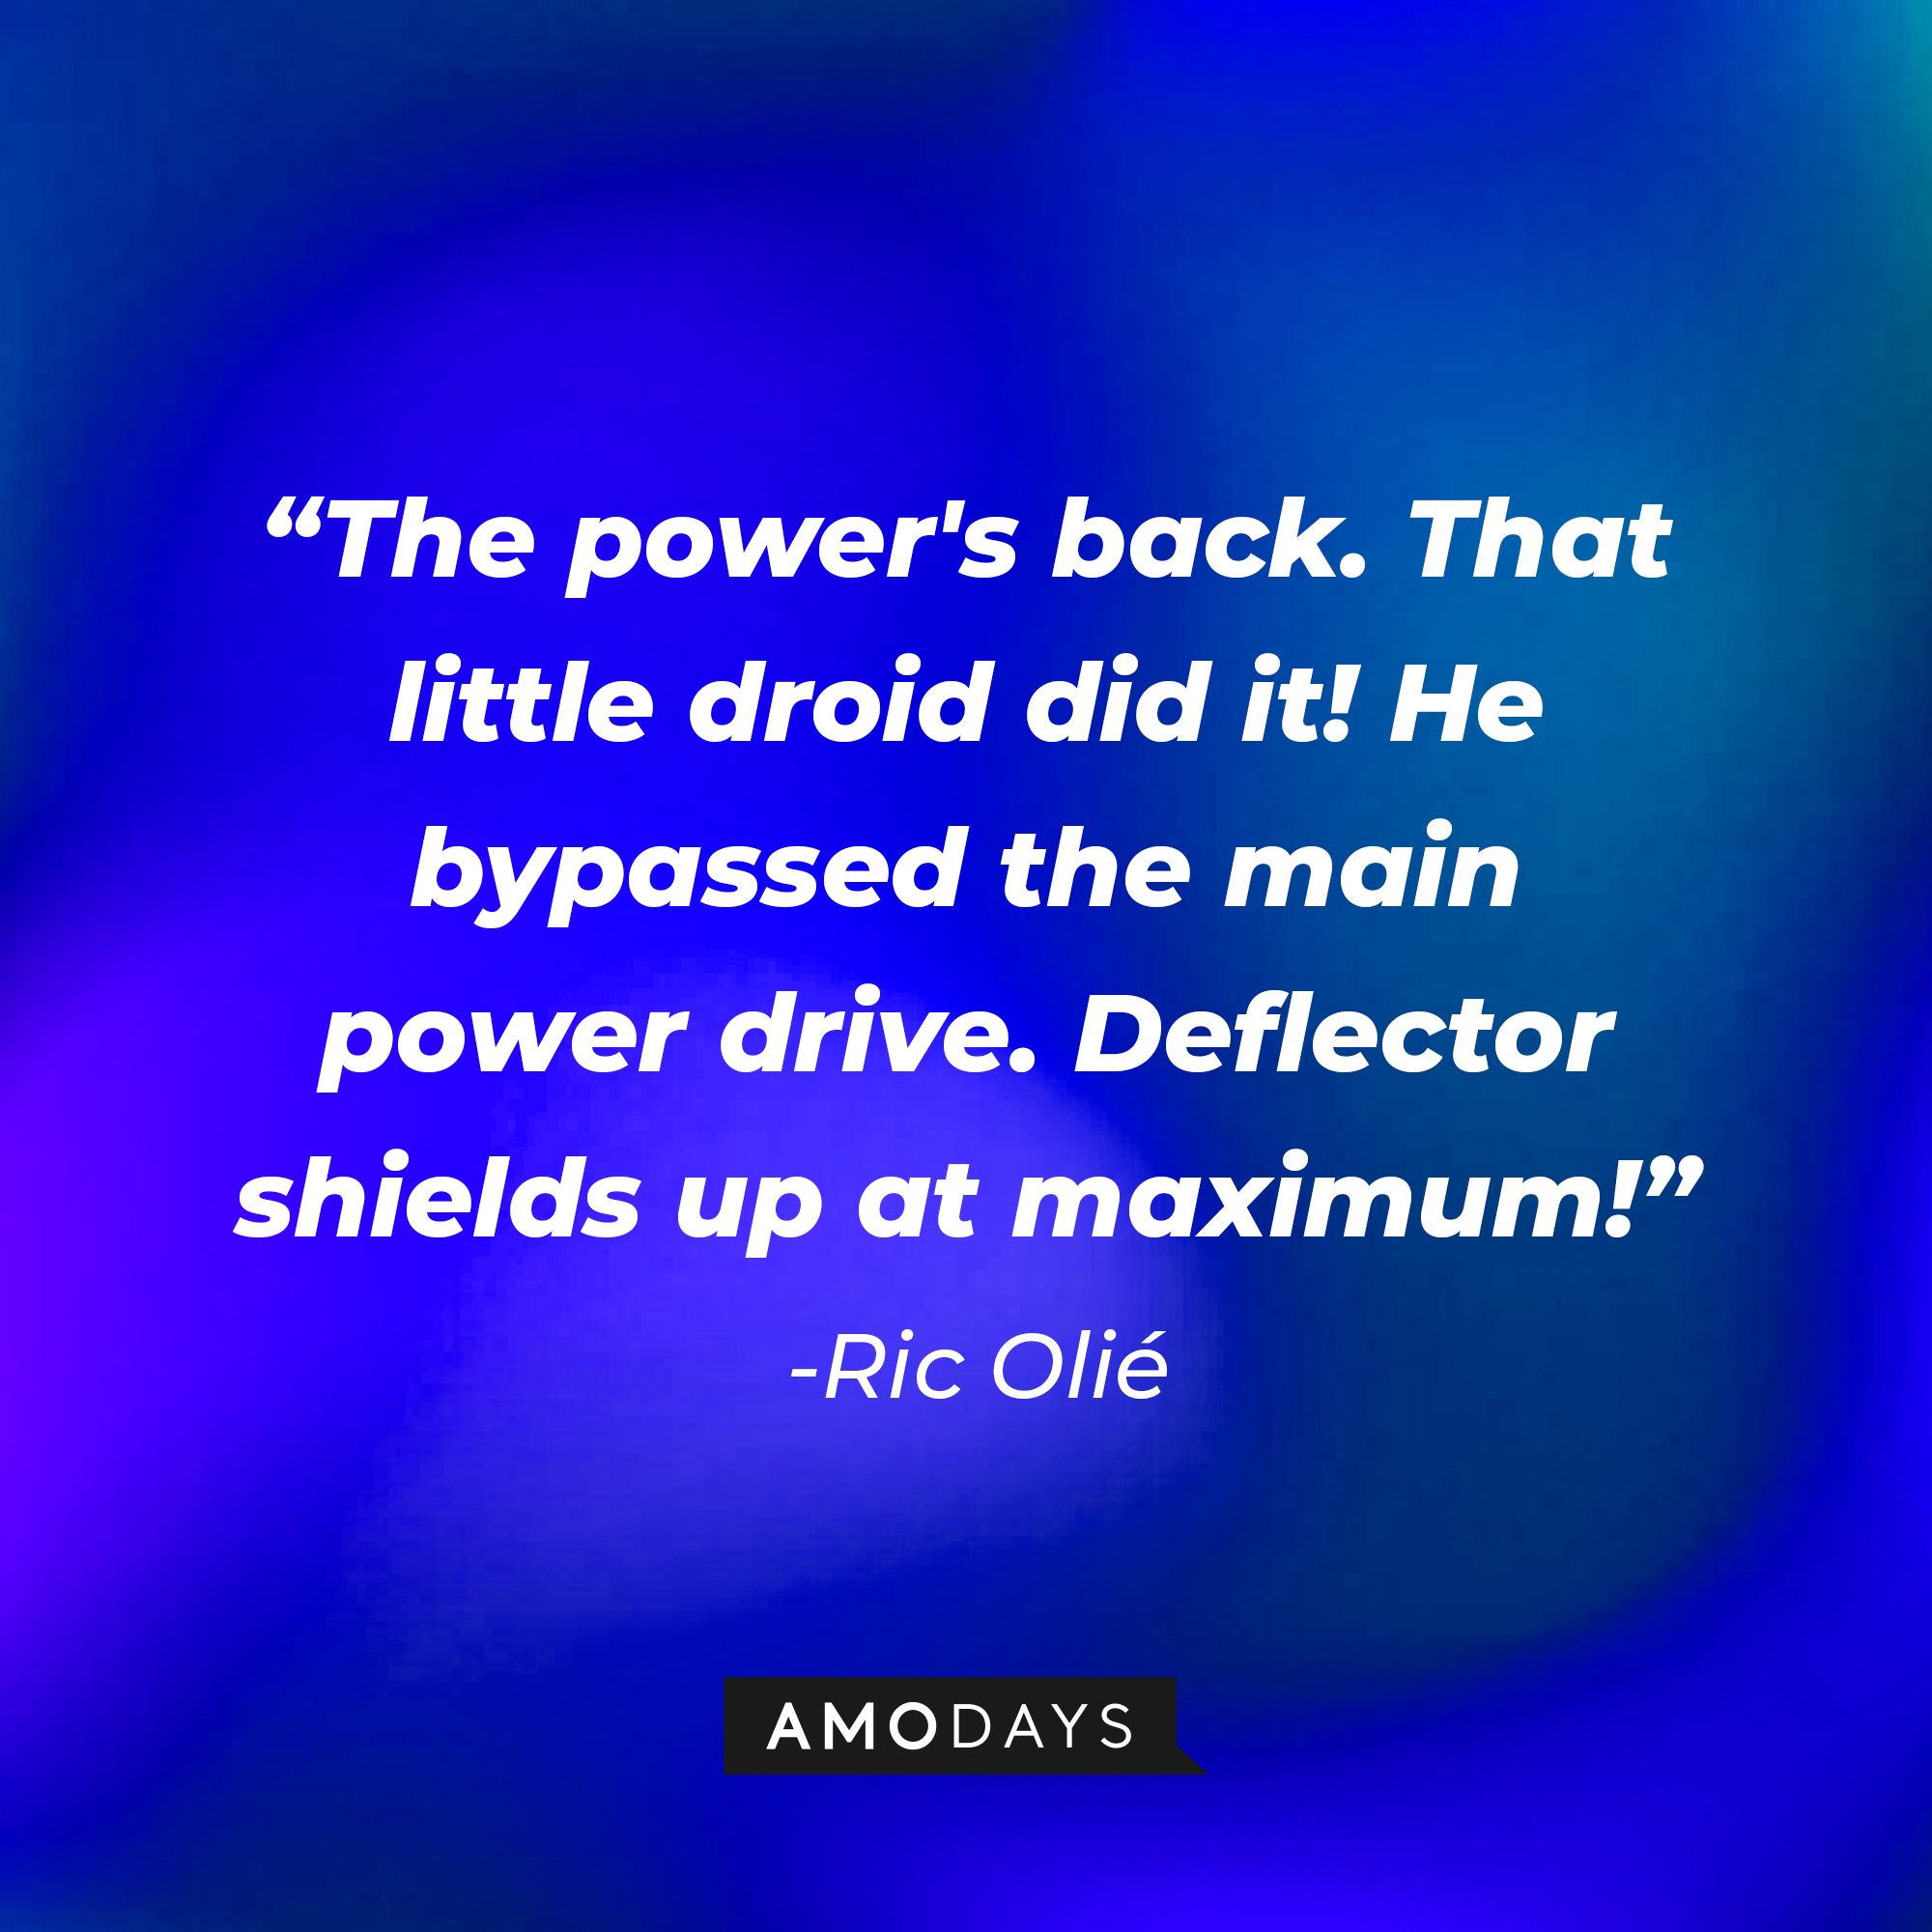 Ric Olié's quote: "The power's back. That little droid did it! He bypassed the main power drive. Deflector shields up at maximum!" | Source: AmoDays